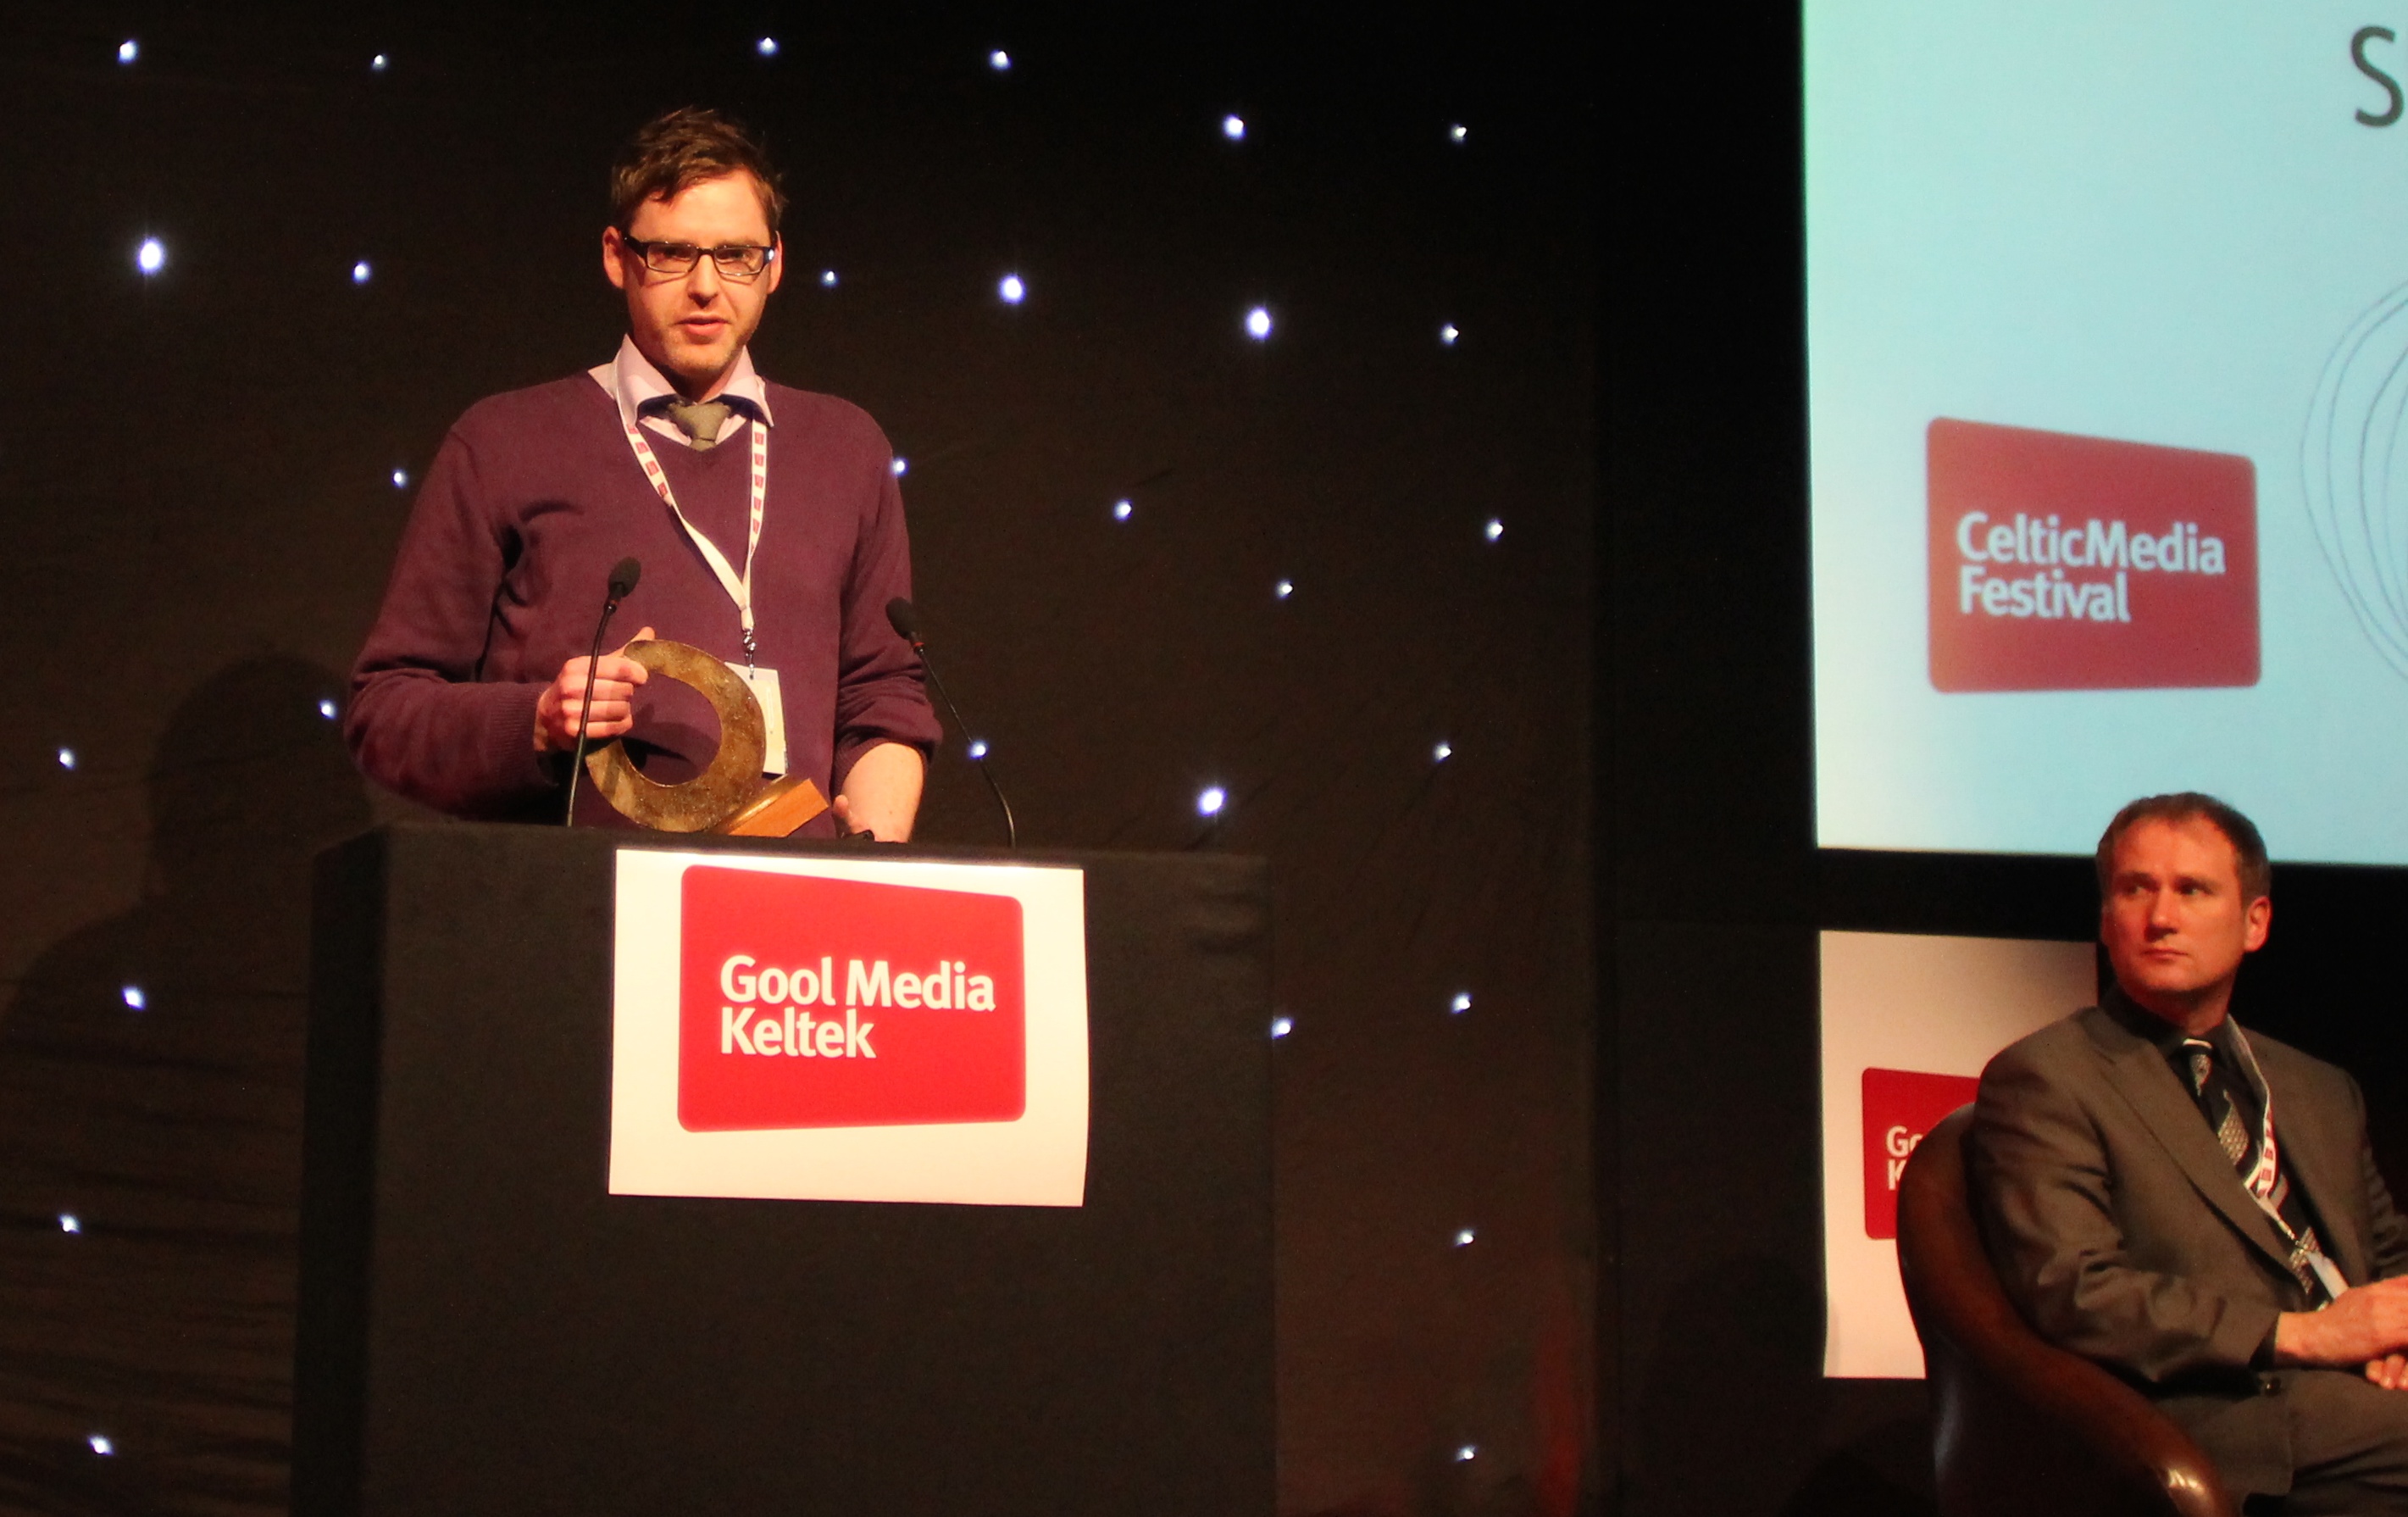 Brian Deane collecting the award for Best Short Drama at the Celtic Media Festival 2014